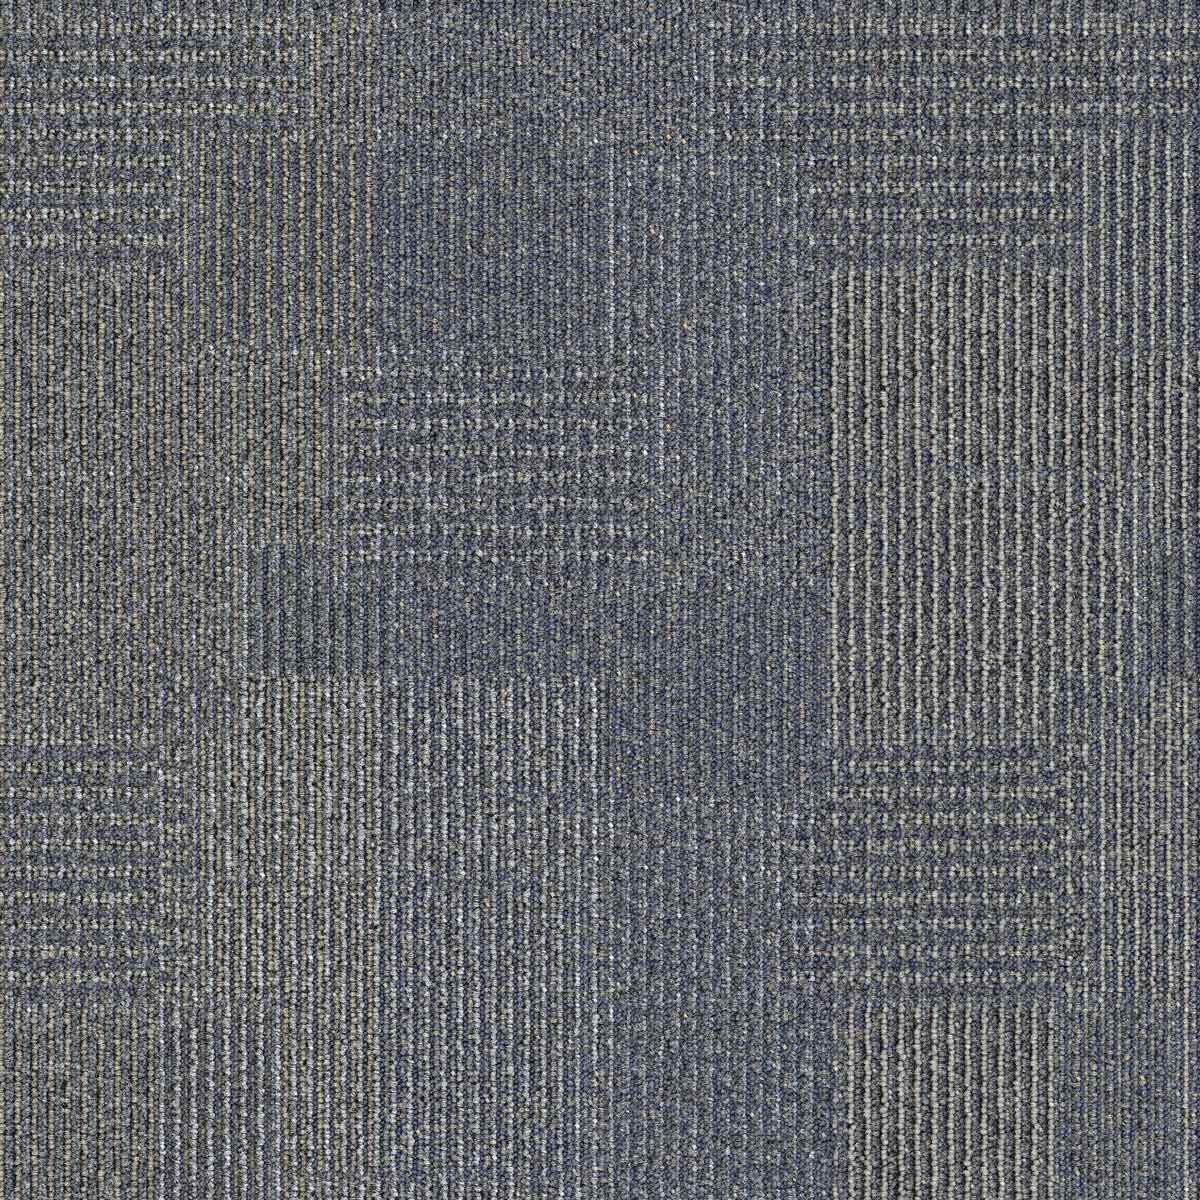 Mohawk Group First One Up Ii Carpet Tile Foremost 24 X Premium 72 00 Sq Ft Ctn